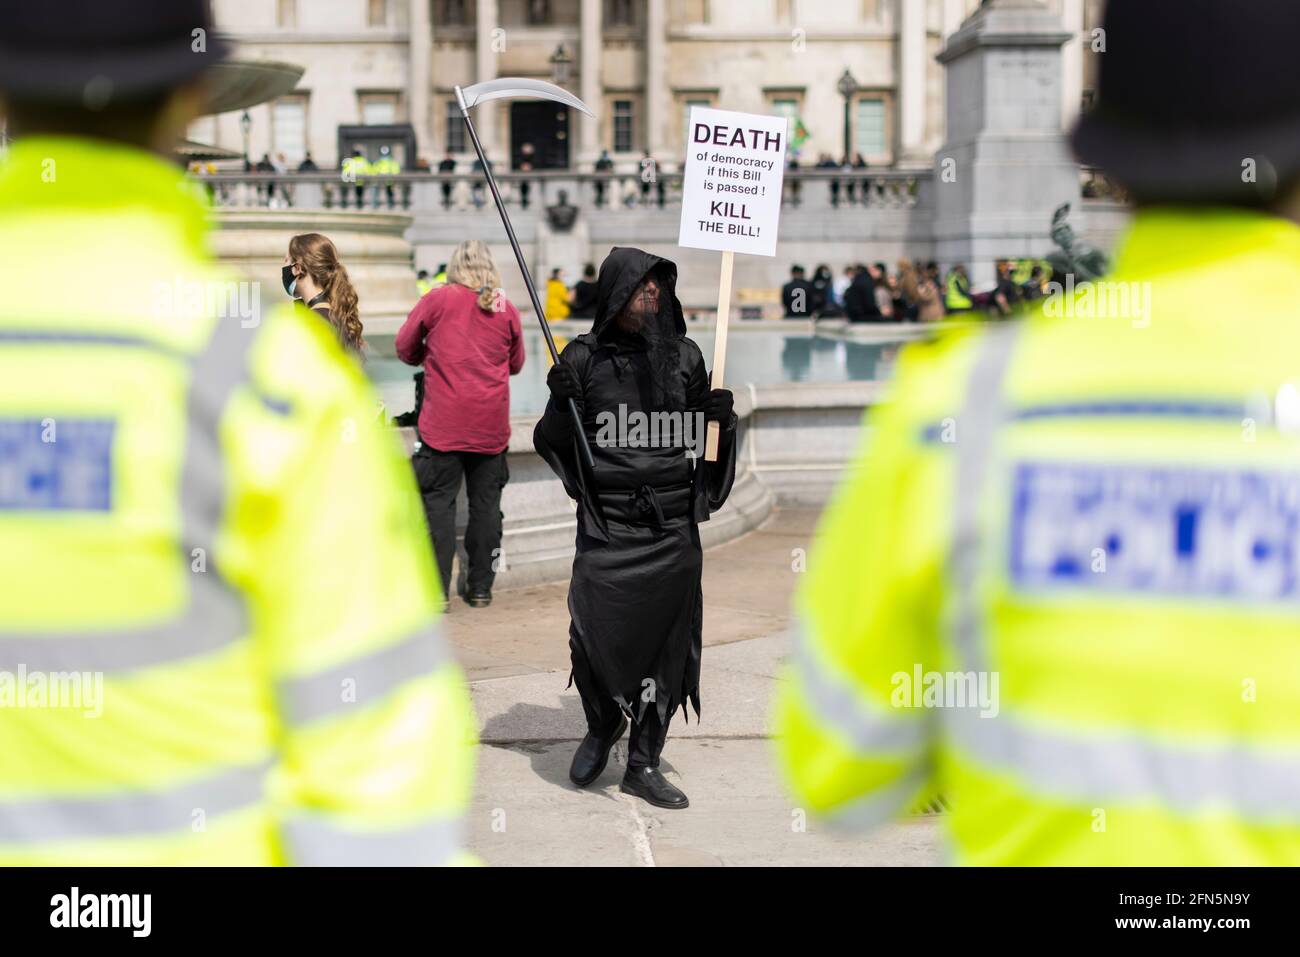 Protester in Grim Reaper costume during 'Kill the Bill' protest against new policing bill, London, 1 May 2021 Stock Photo